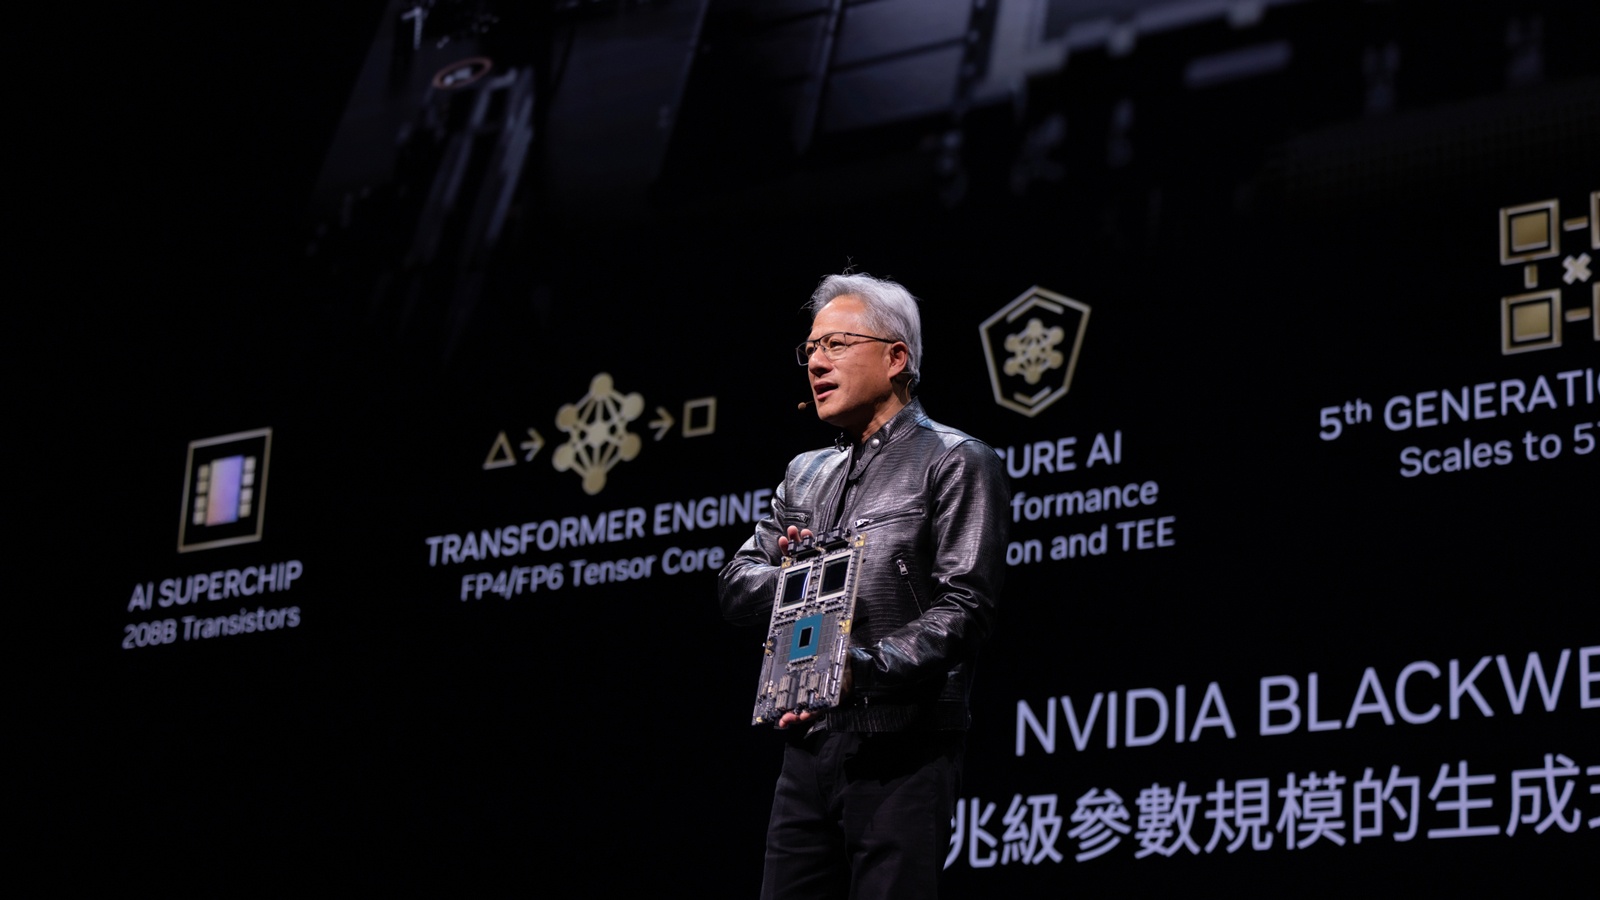 ‘The future of computing is accelerated’, says Nvidia’s CEO at major tech expo